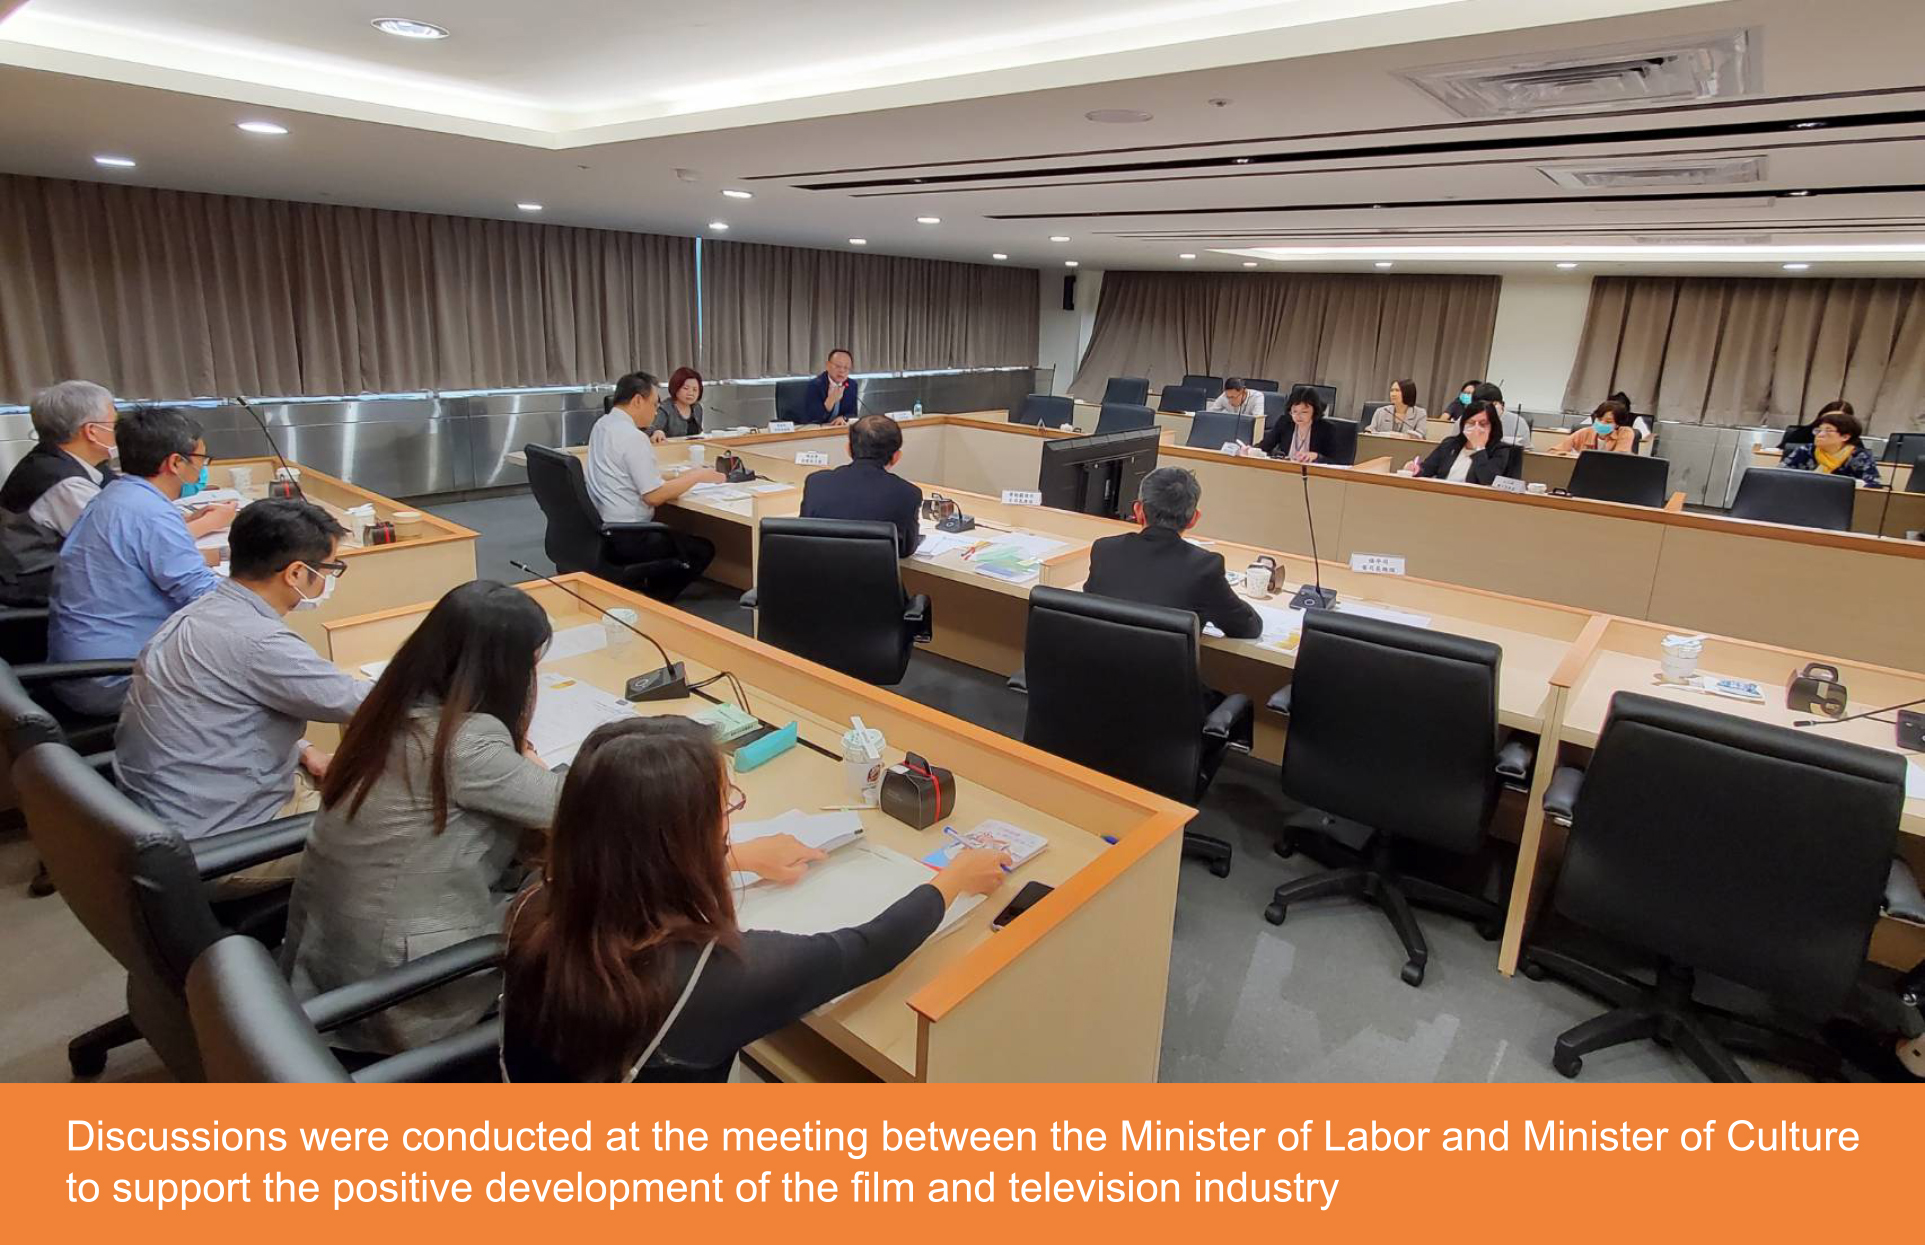 Taiwan's Ministers of Labor and Culture Meet to Build a Sound Working Environment for the Film and Television Industry